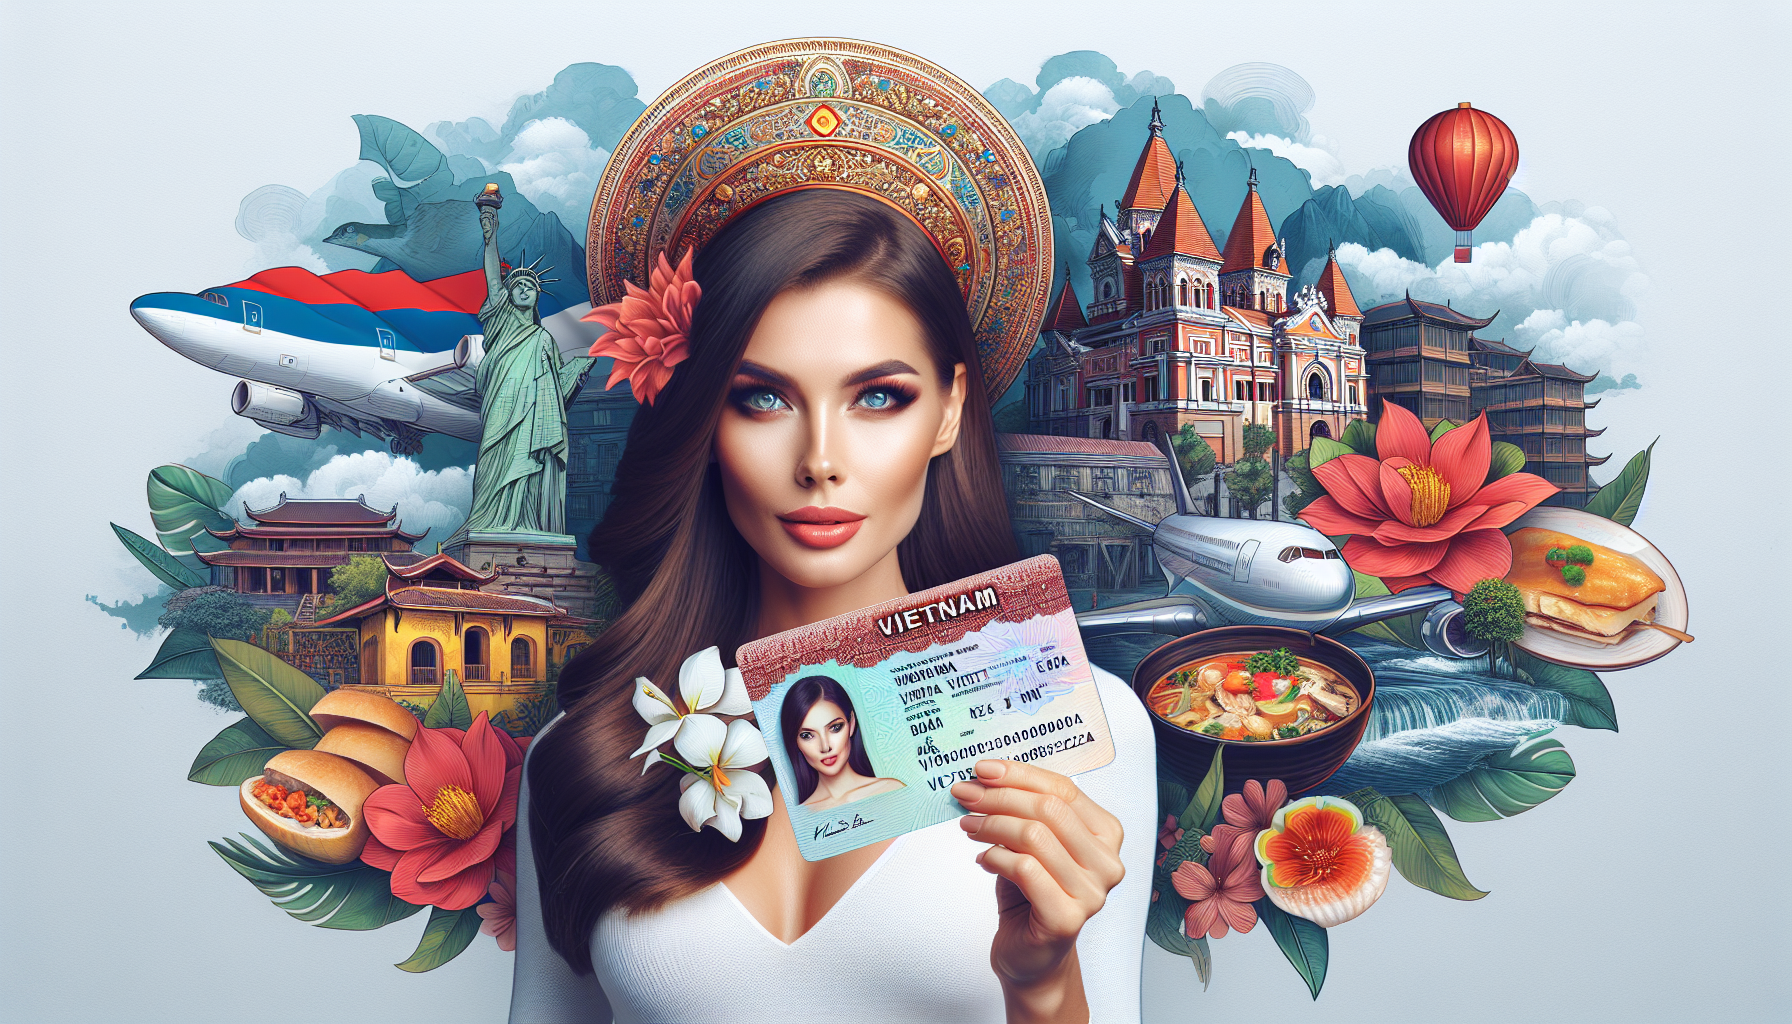 Business Visa for Serbian Citizens: How to Apply Without Sponsorship